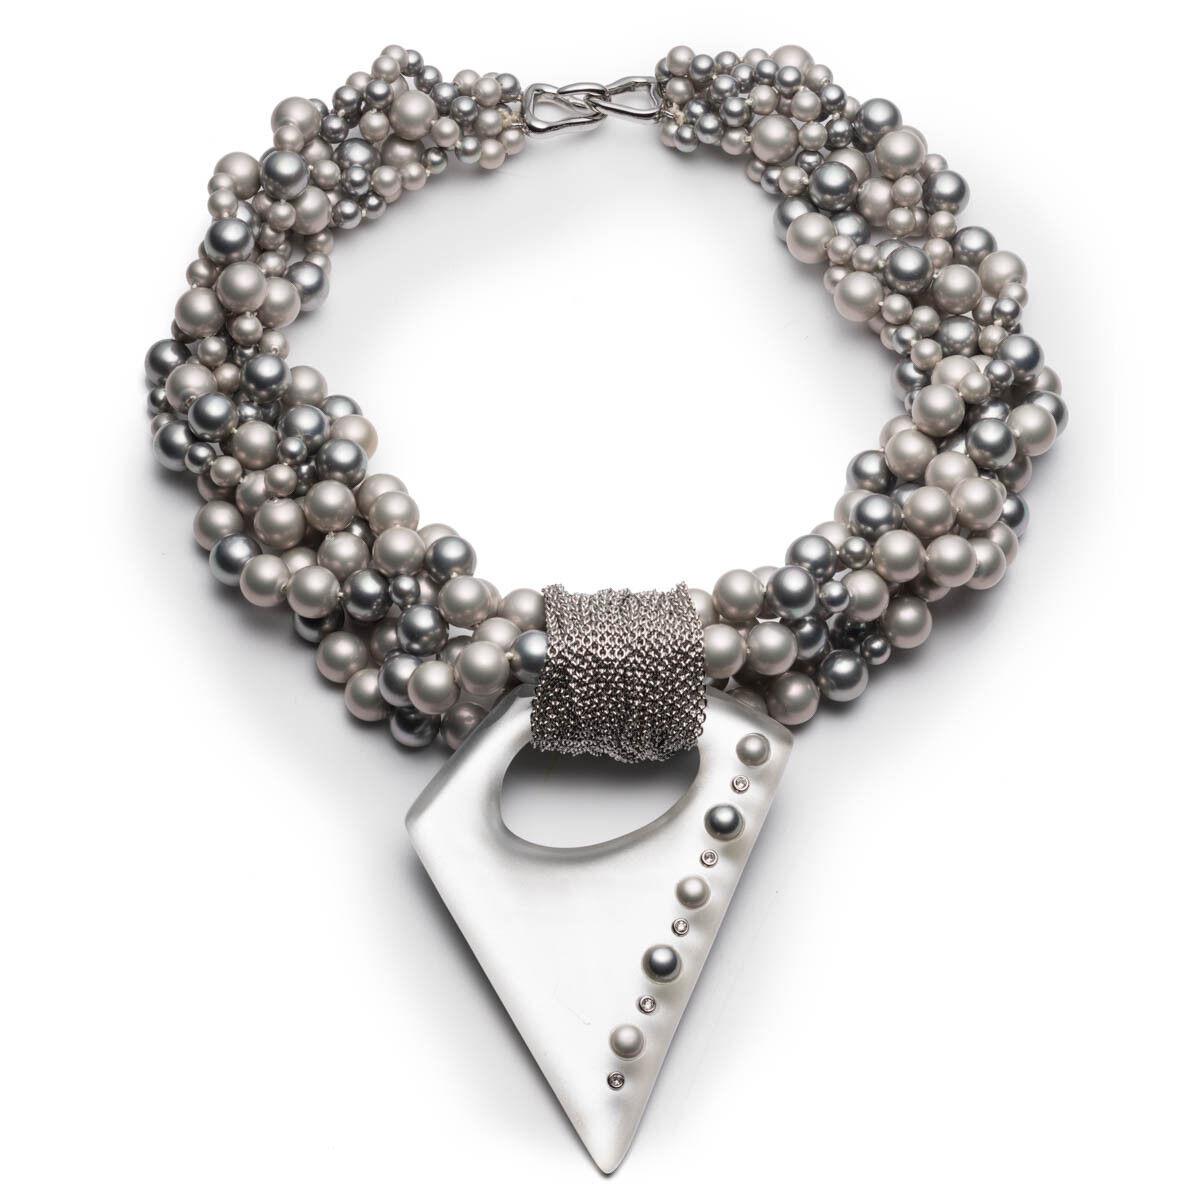 Simply Beautiful! Chic and Stylish Multi Strand Pearl Studded Silver Lucite Drop Pendant Necklace make up this Fabulous Designer Necklace by Alexis Bittar. Measuring approx. 24